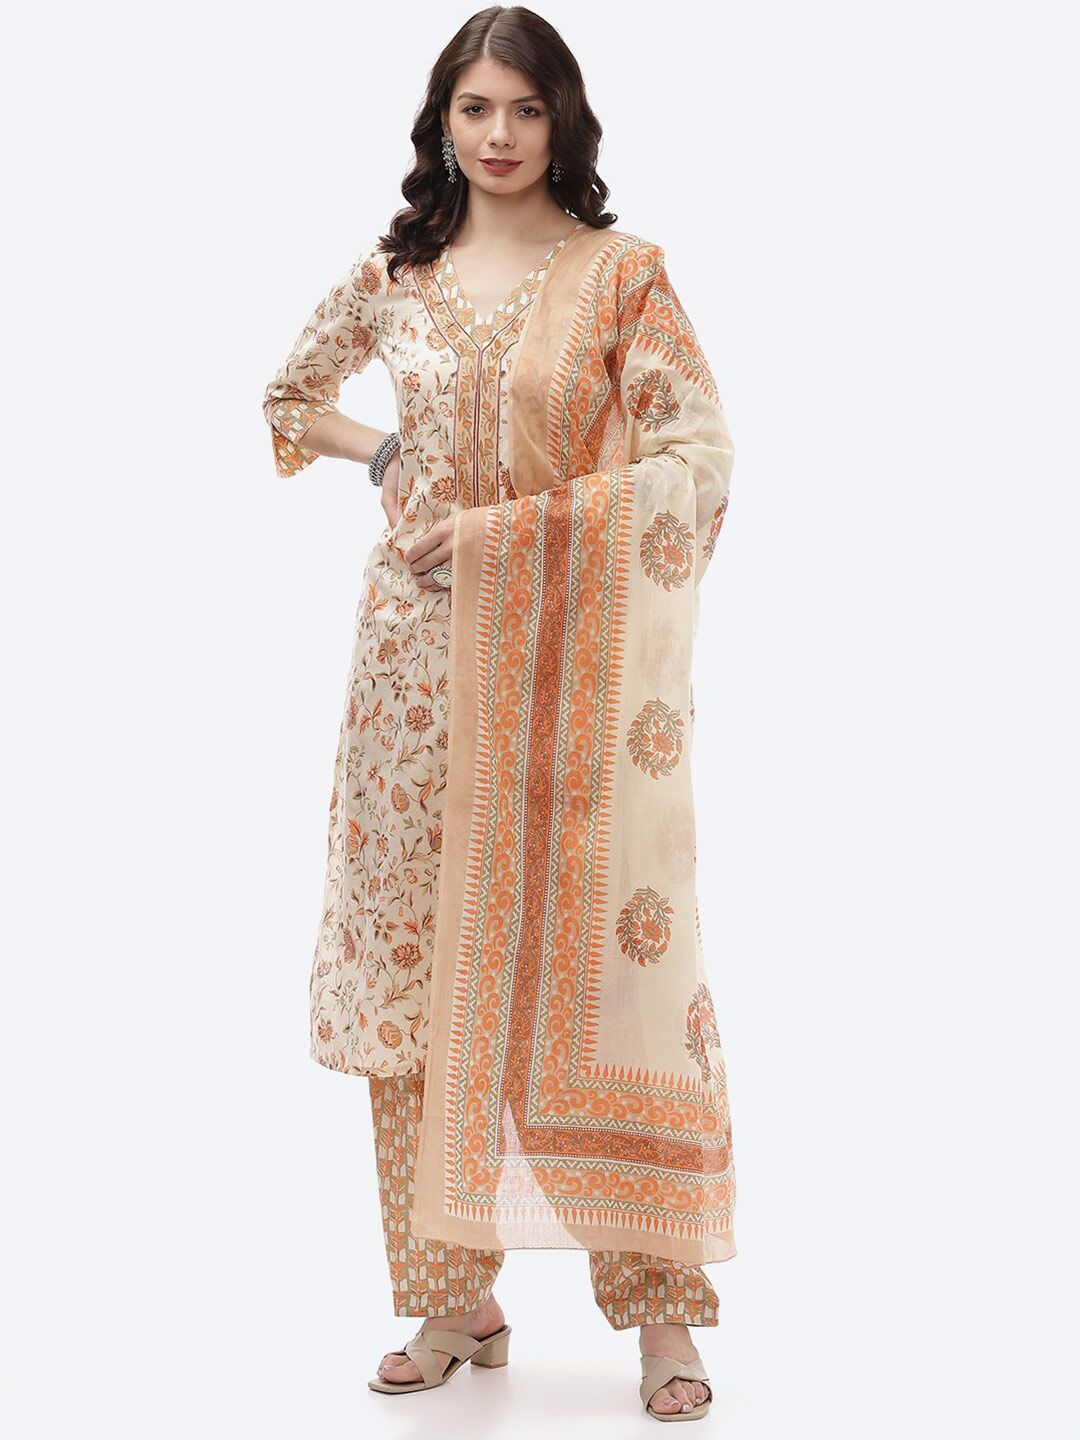 Biba Peach-Coloured & Brown Printed Unstitched Dress Material Price in India